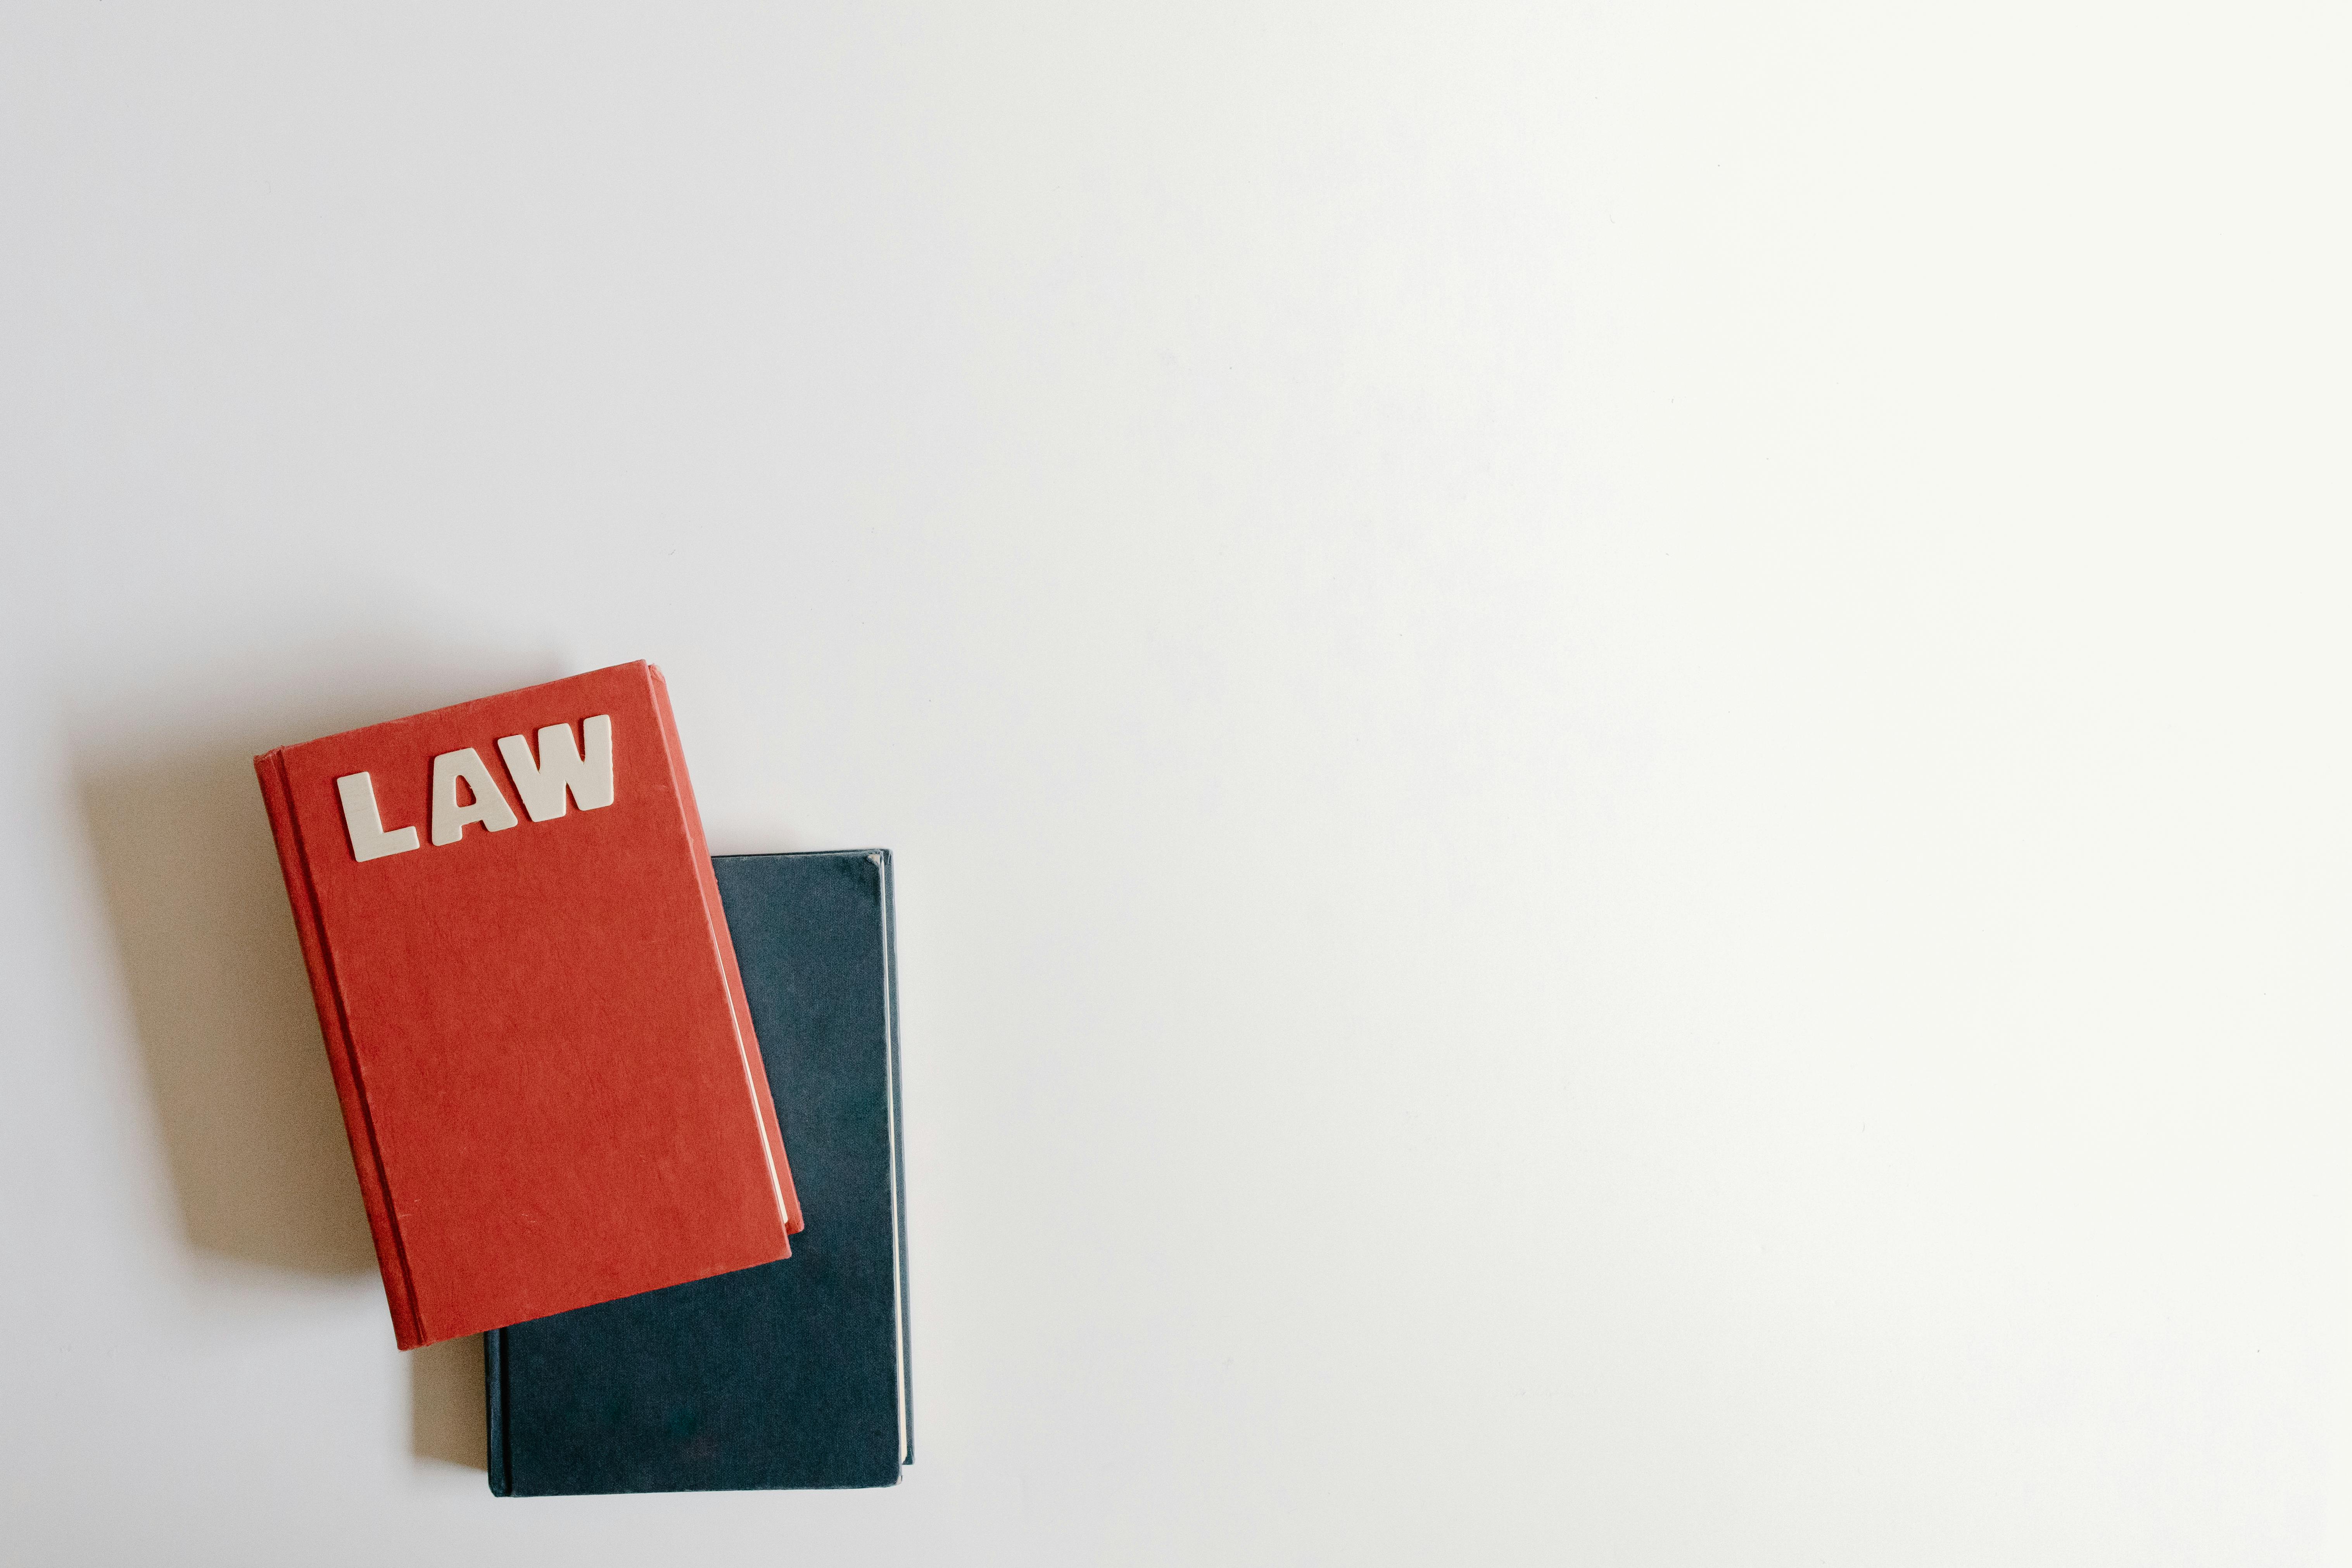 Law Books Photos, Download The BEST Free Law Books Stock Photos & HD Images